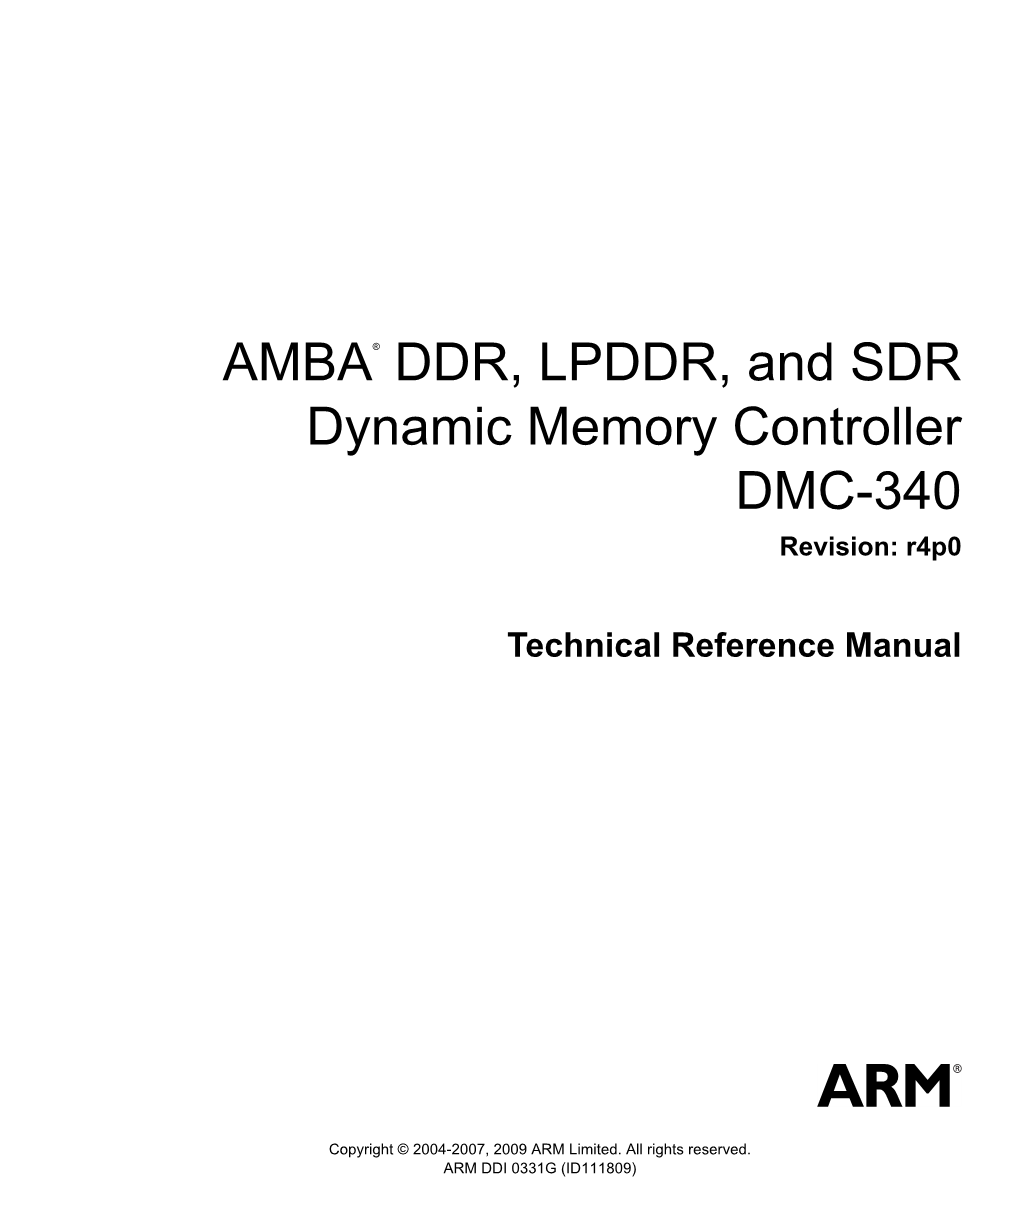 AMBA DDR, LPDDR, and SDR Dynamic Memory Controller DMC-340 Technical Reference Manual